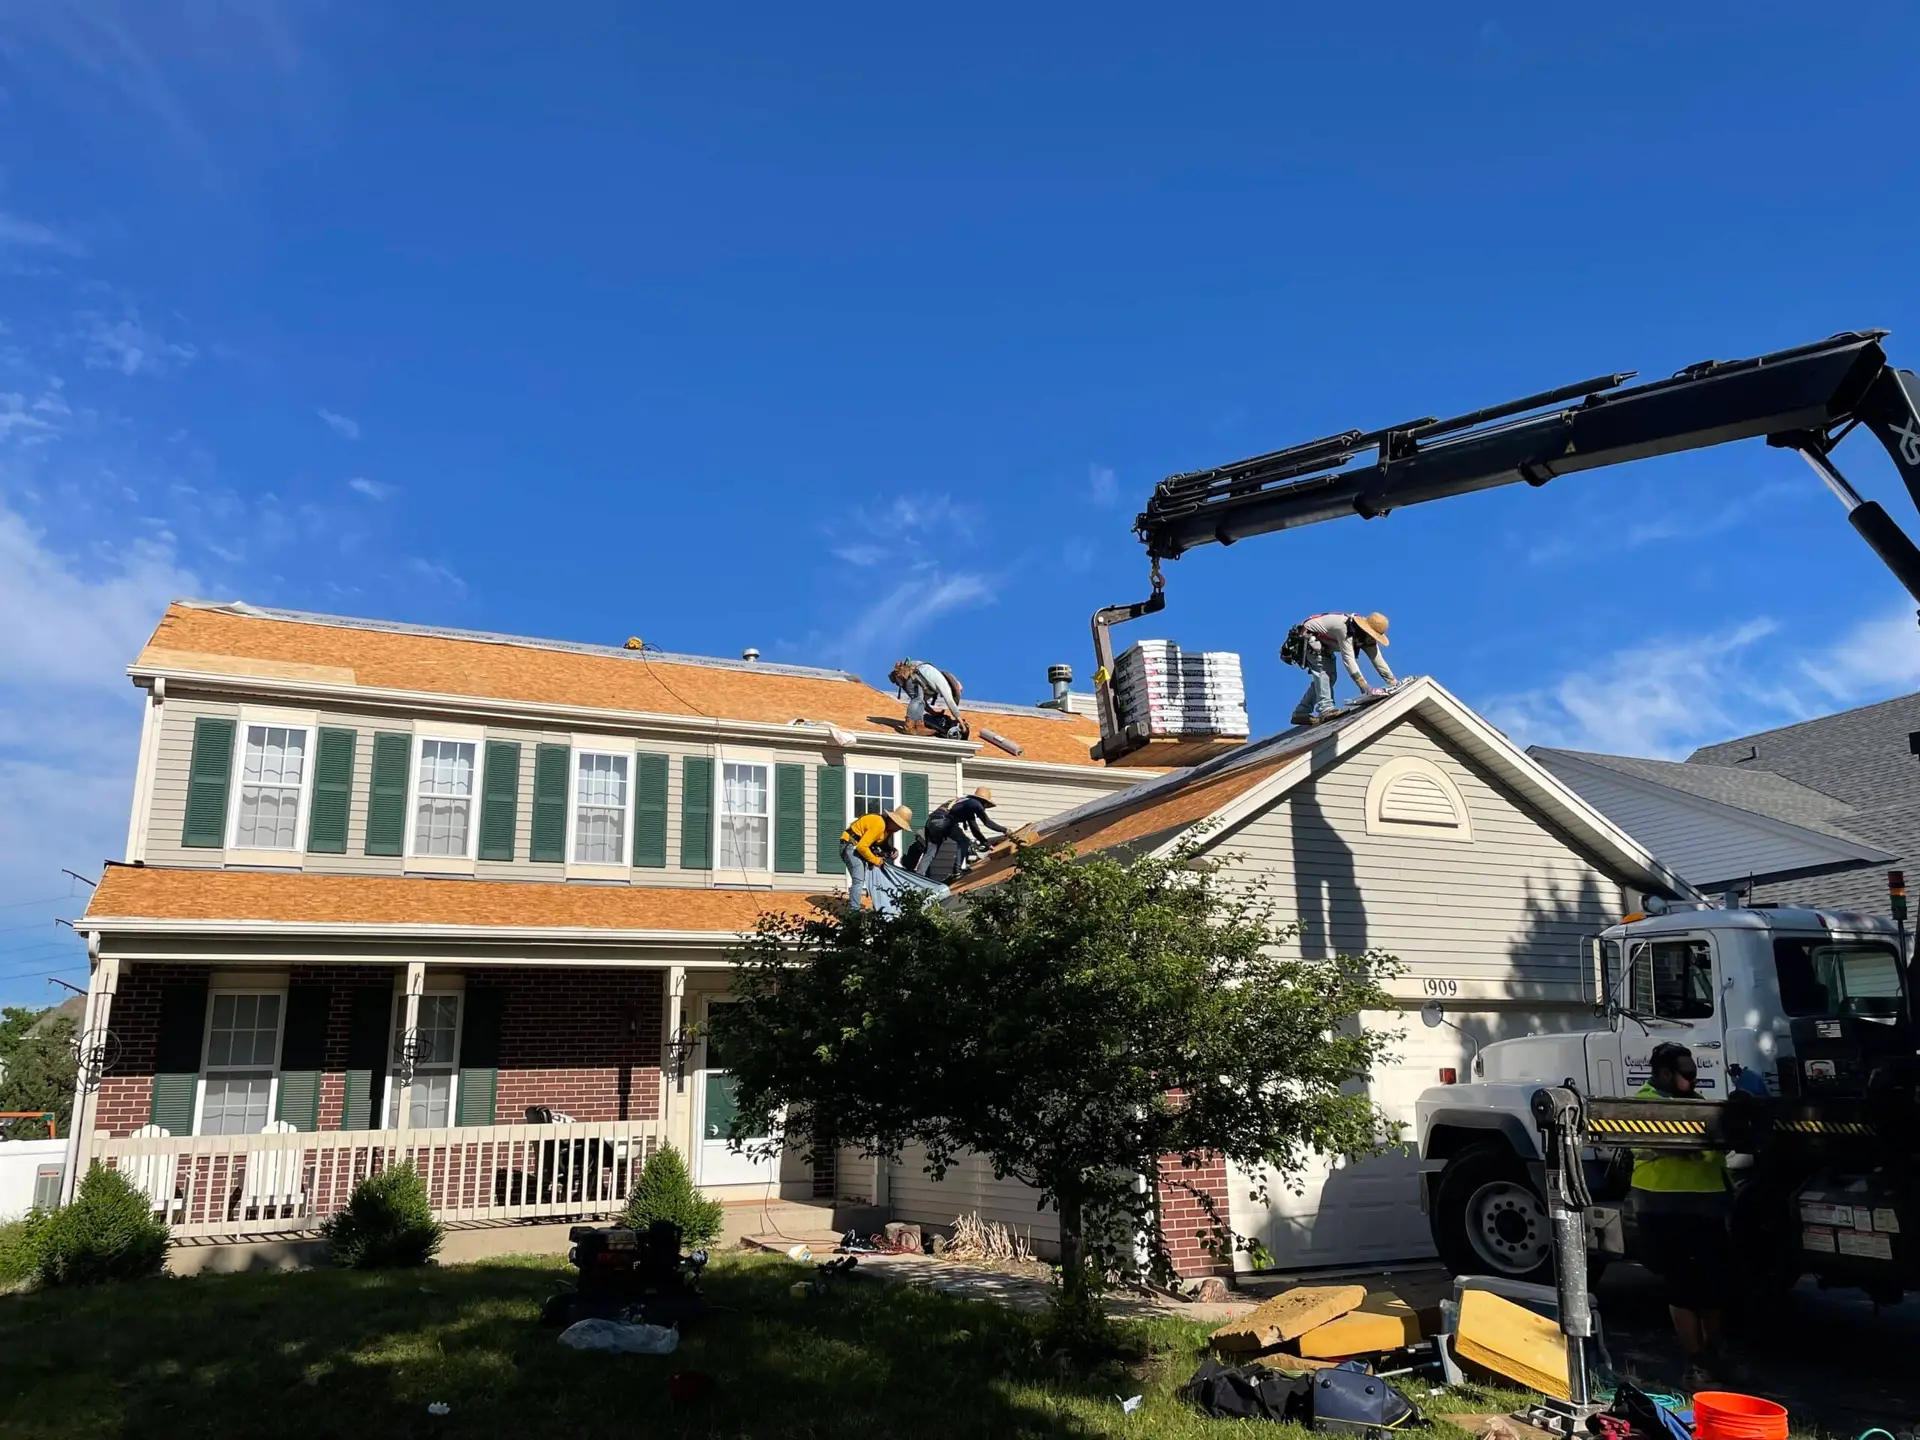 5 Steps to Protect Your Home with Residential Roofing Services